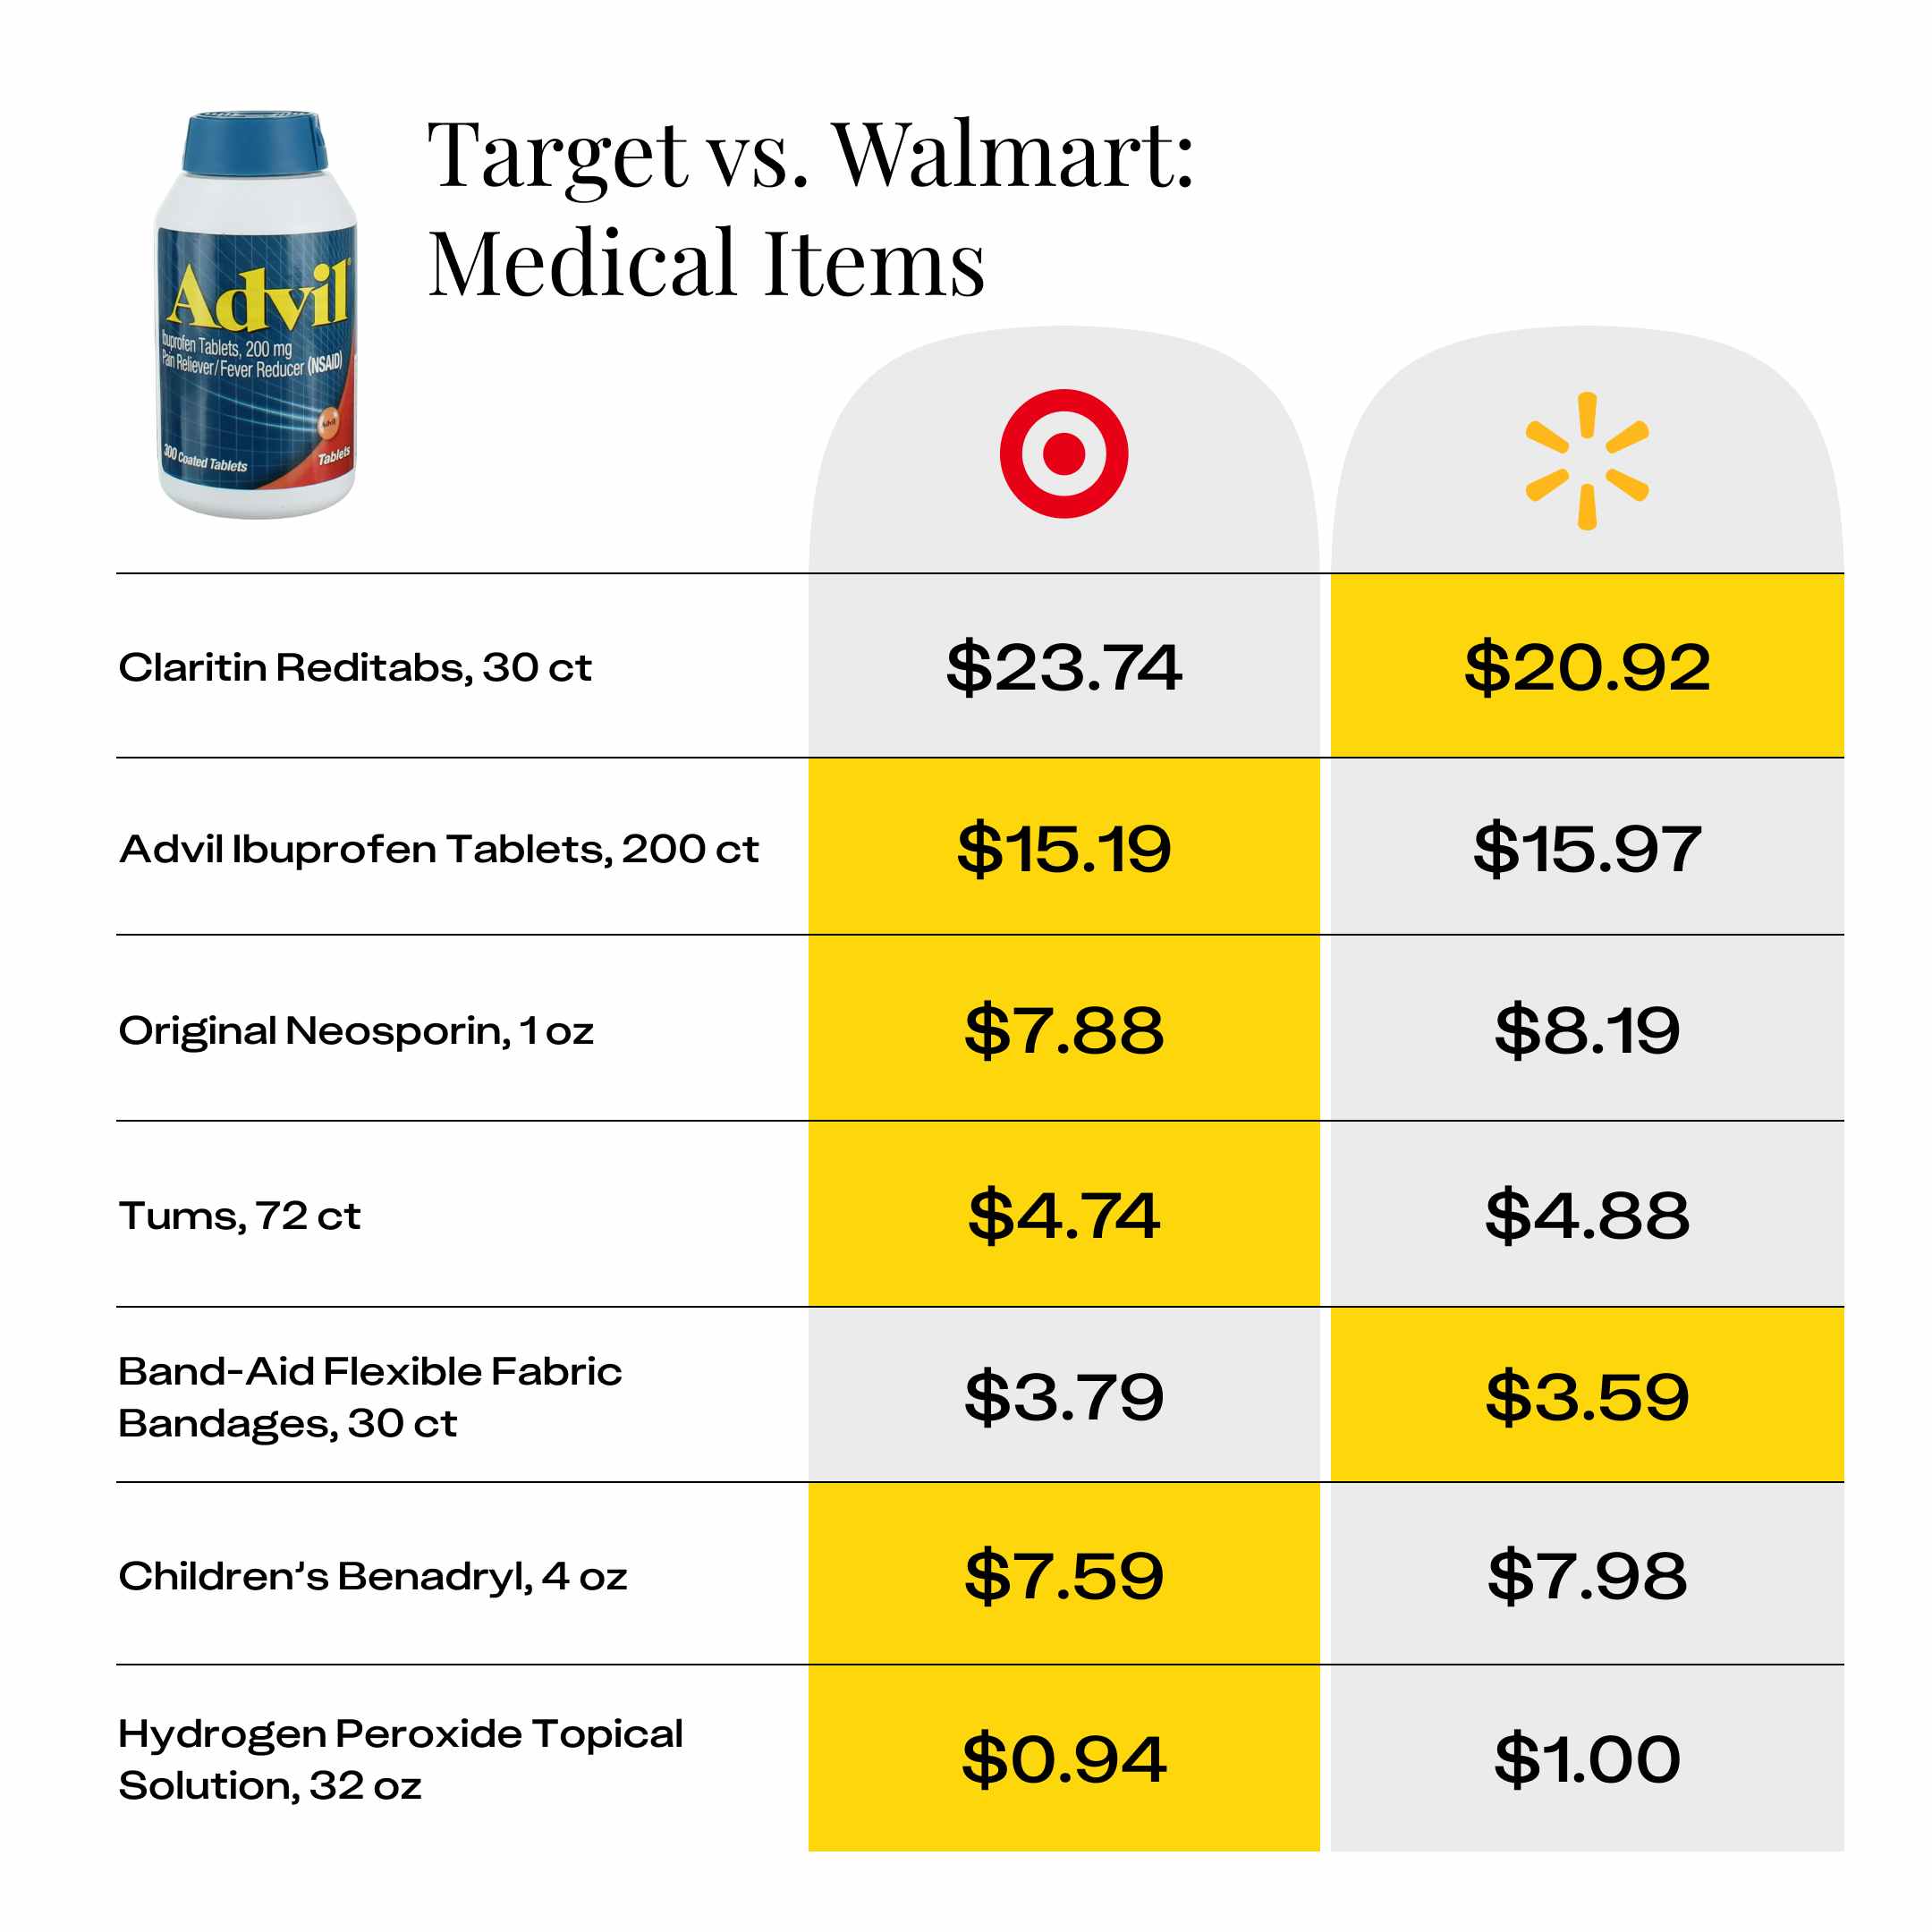 price comparison for medical items at Target and Walmart